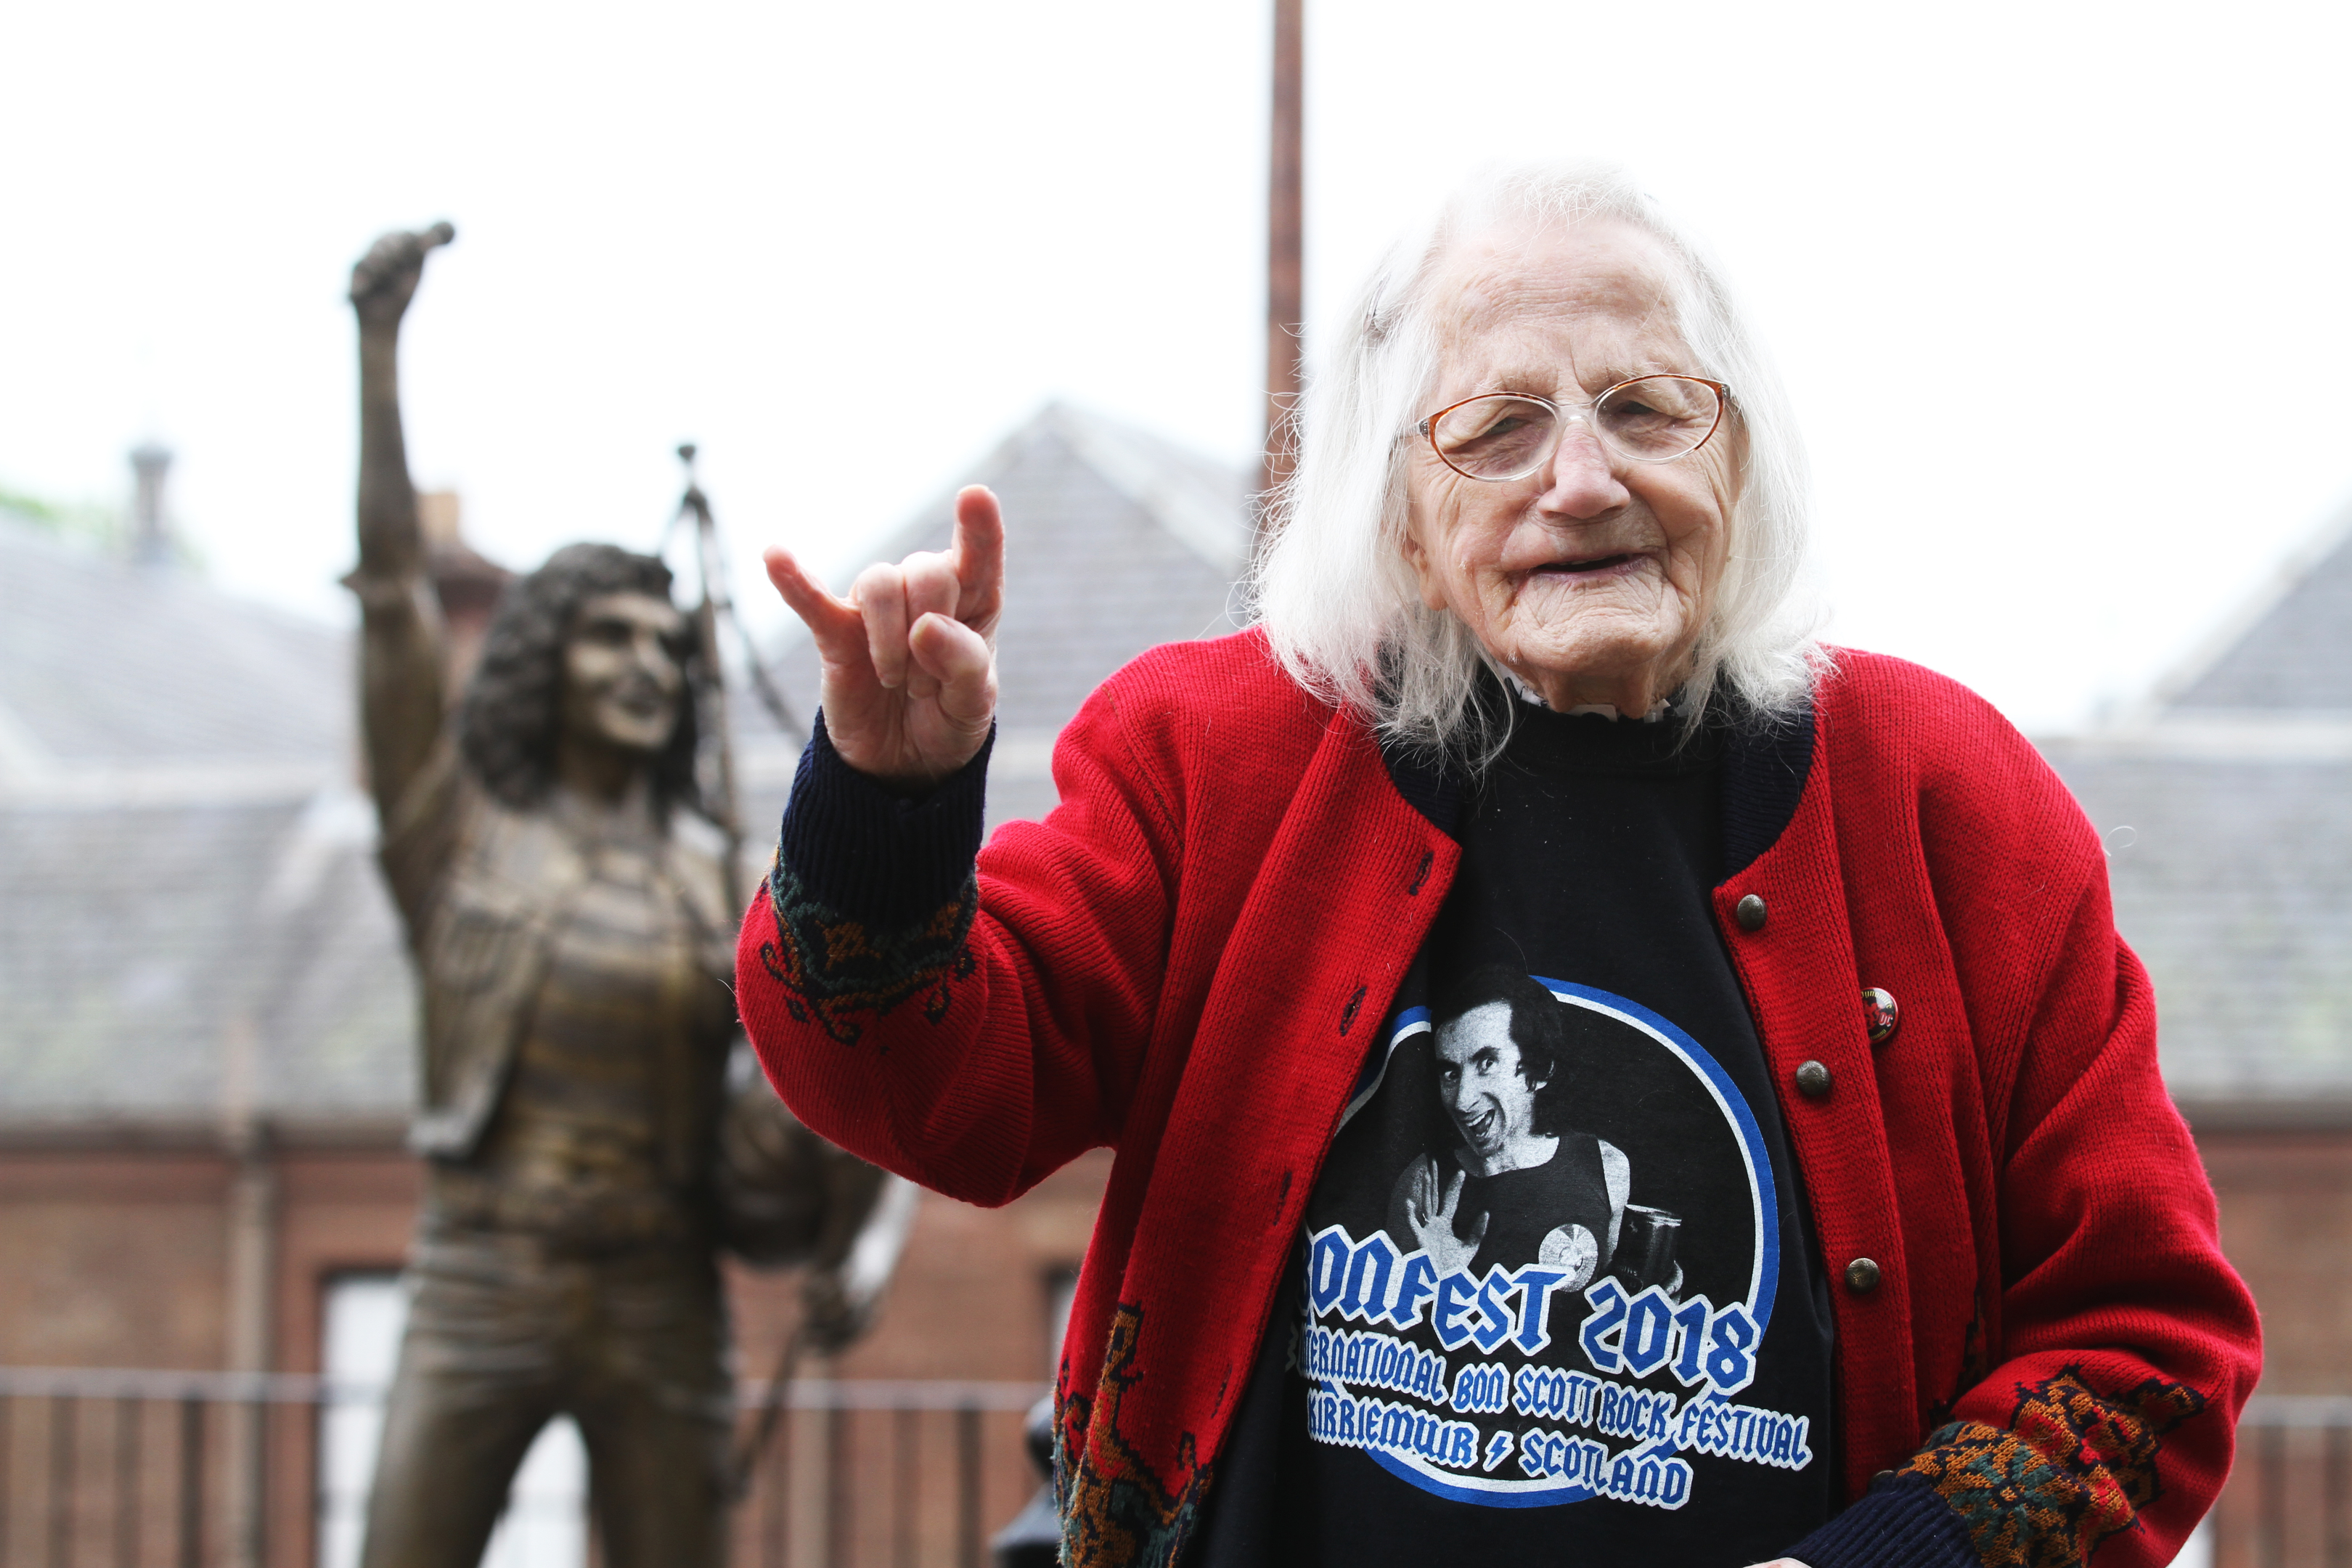 Eliza Williamson was born in 1918 and is a long-timeAC/DC fan.